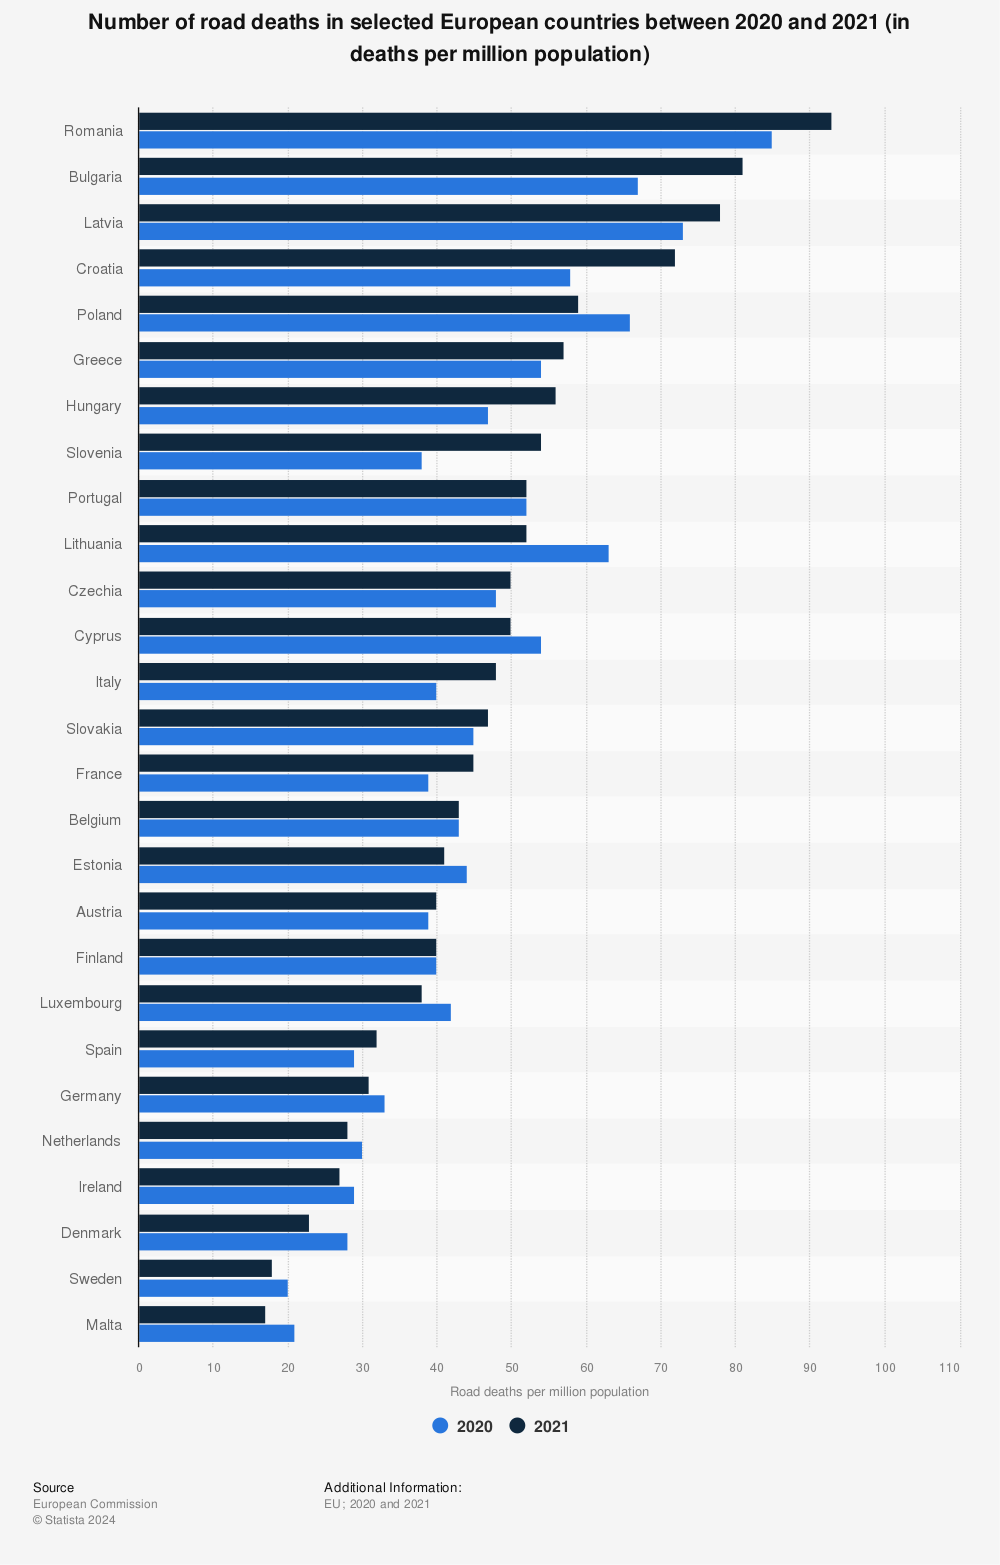 Statistic: Number of road deaths in selected European countries between 2020 and 2021 (in deaths per million population) | Statista